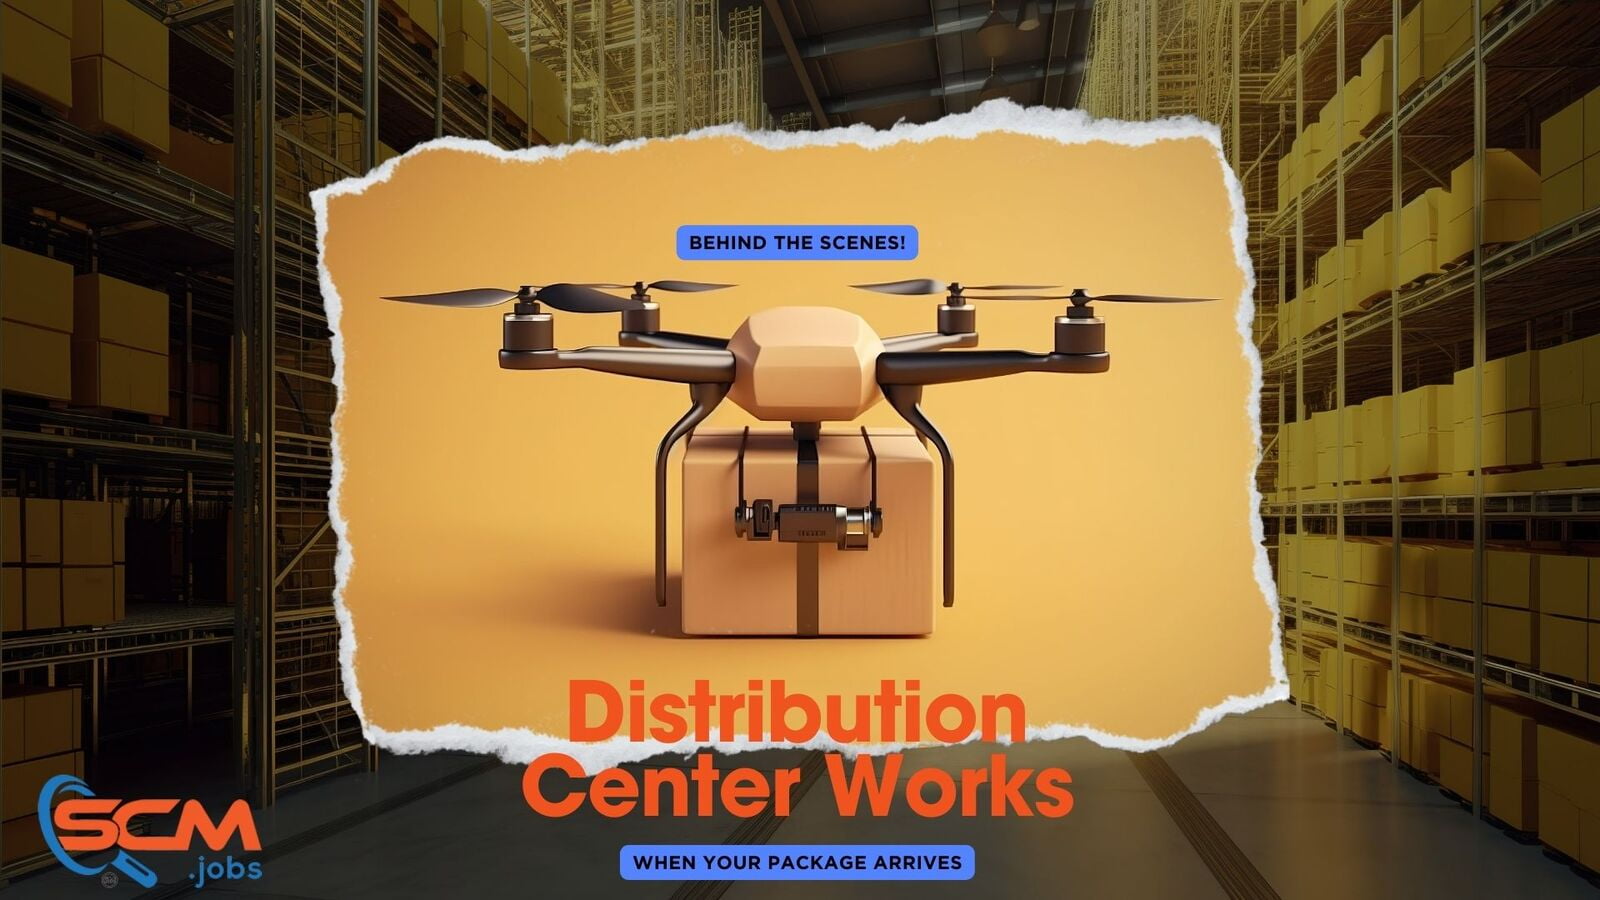 Behind the Scenes: How the Distribution Center Works When Your Package Arrives